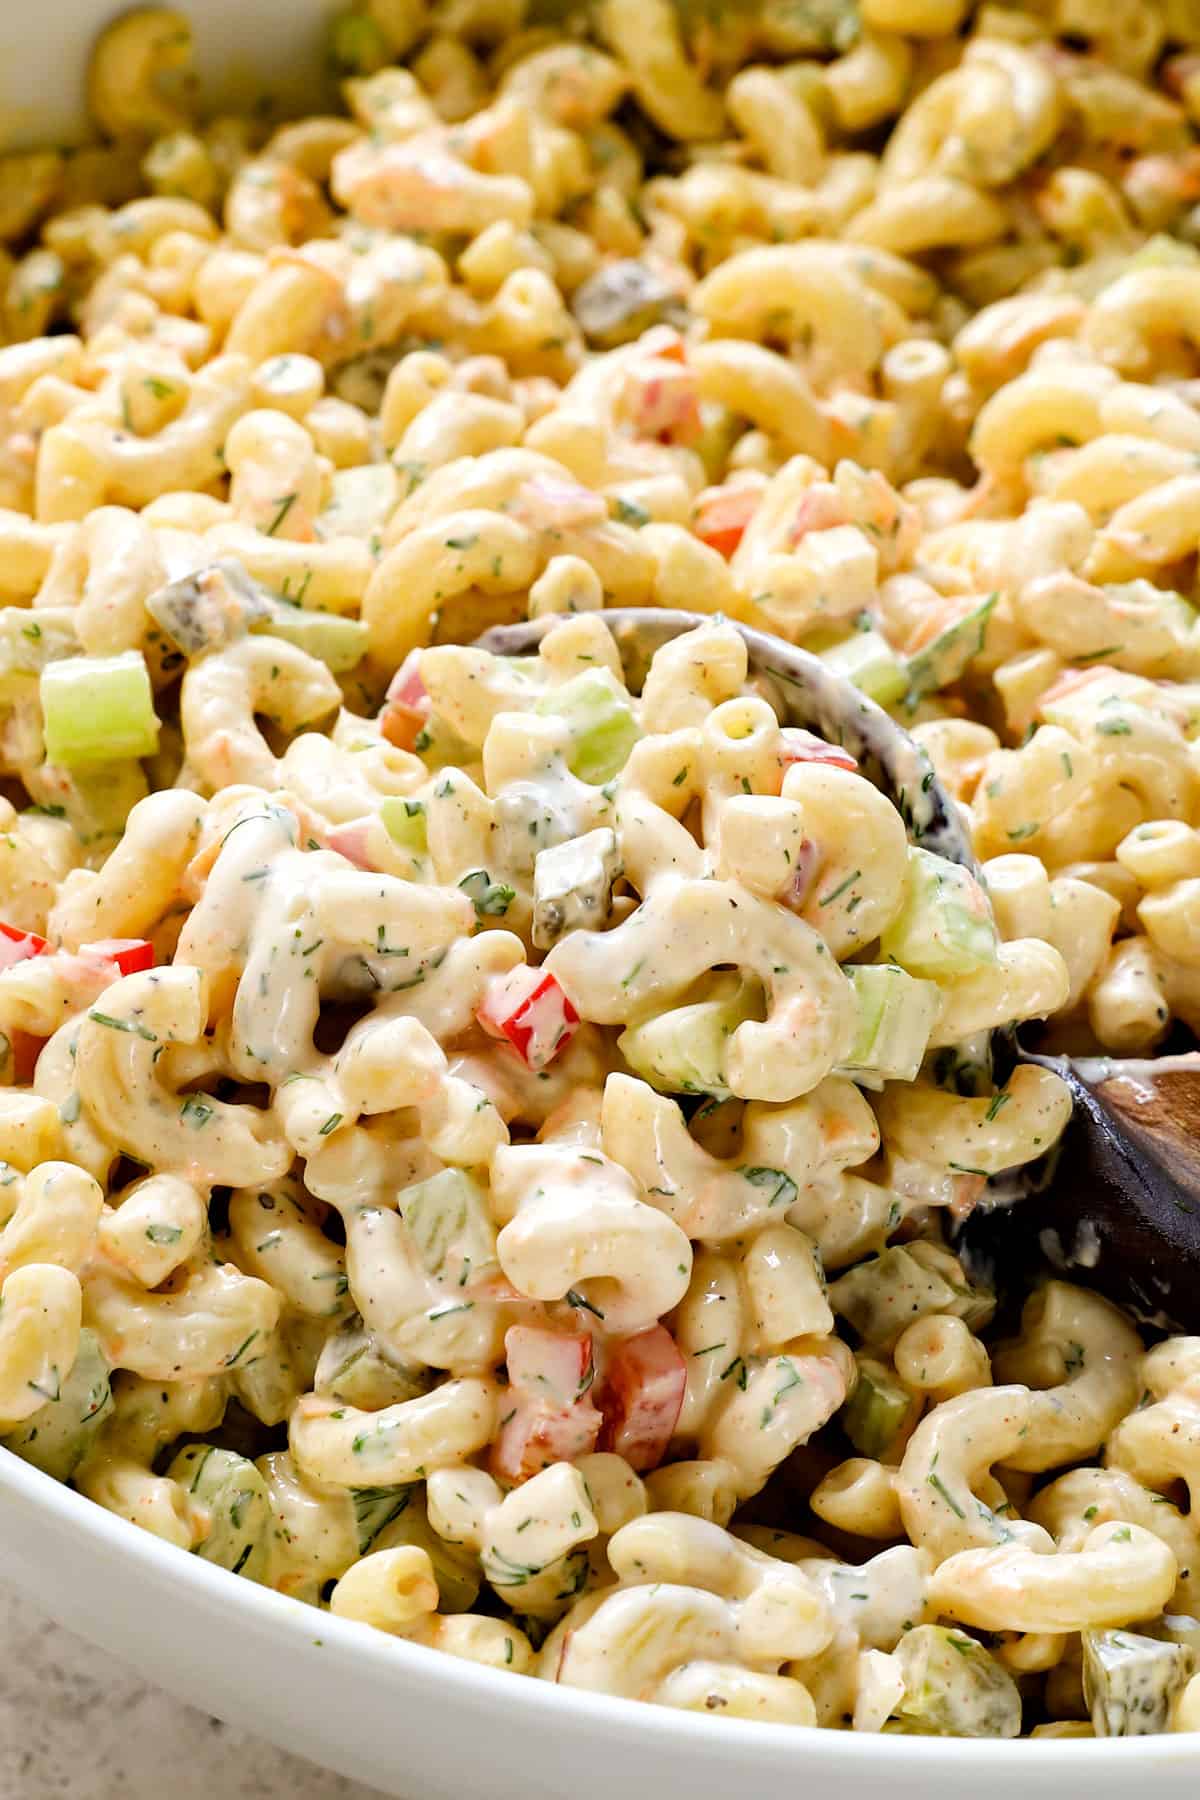 serving easy macaroni salad recipe in a bowl garnished by dill